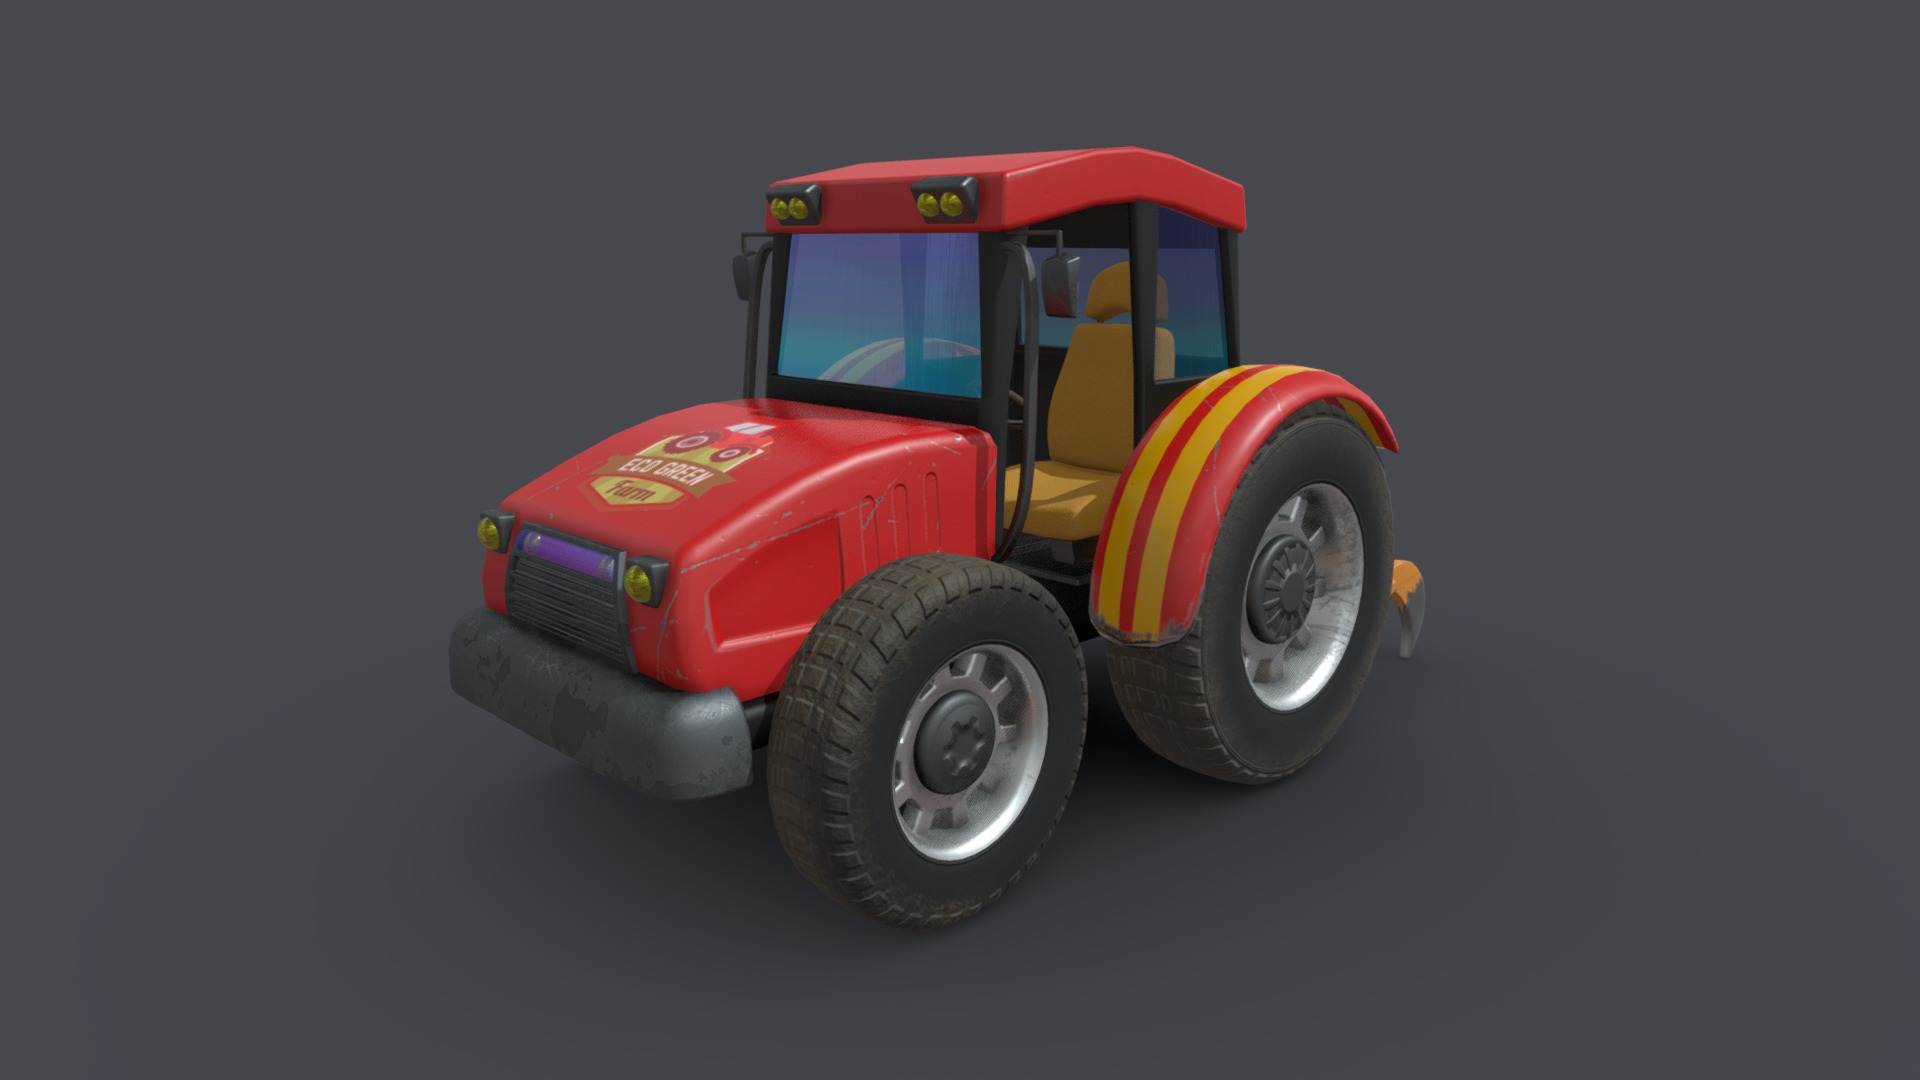 3D model Farming Vehicle 01 - This is a 3D model of the Farming Vehicle 01. The 3D model is about a toy tractor on a white background.